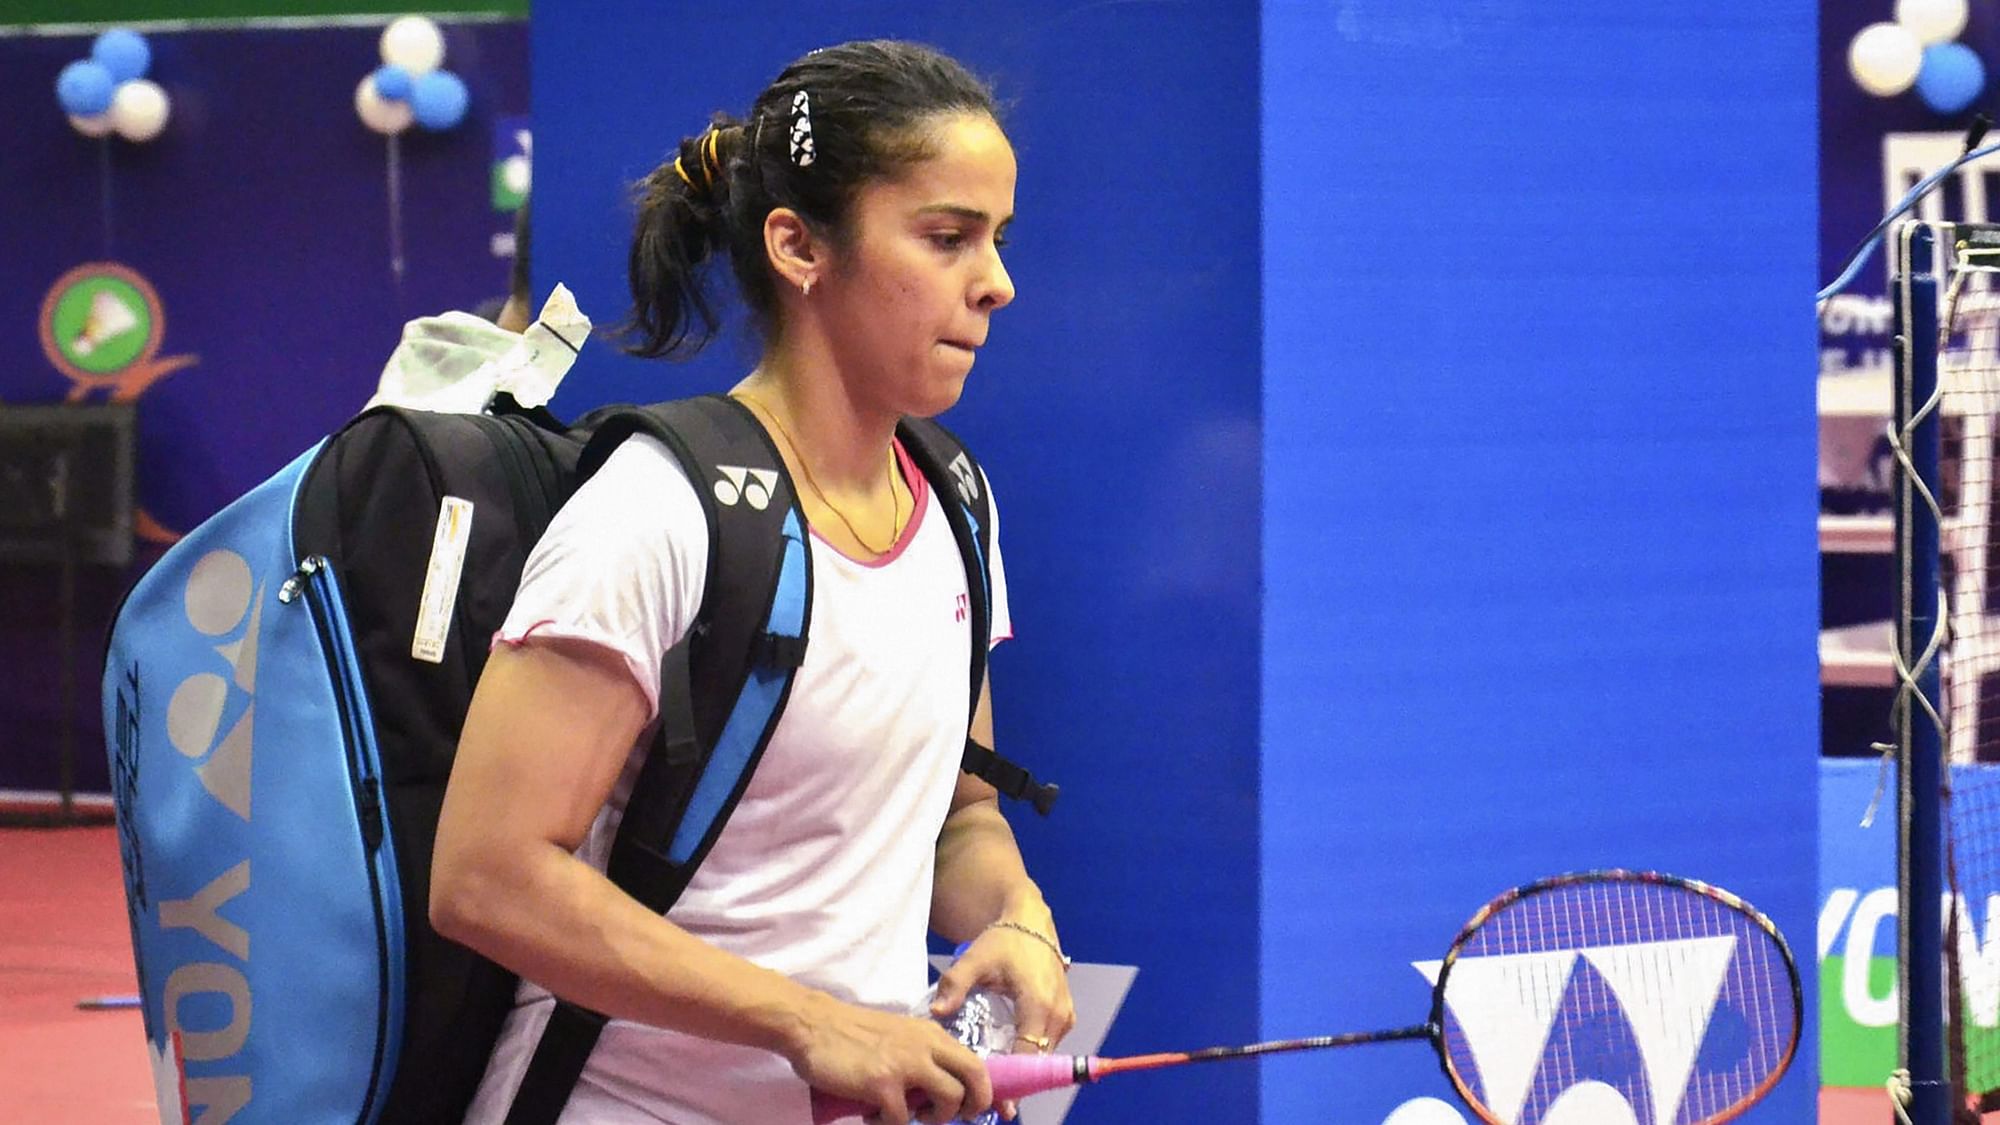 Star Indian shuttler Saina Nehwal pulled out of the upcoming Premier Badminton League to prepare for the 2020 season.